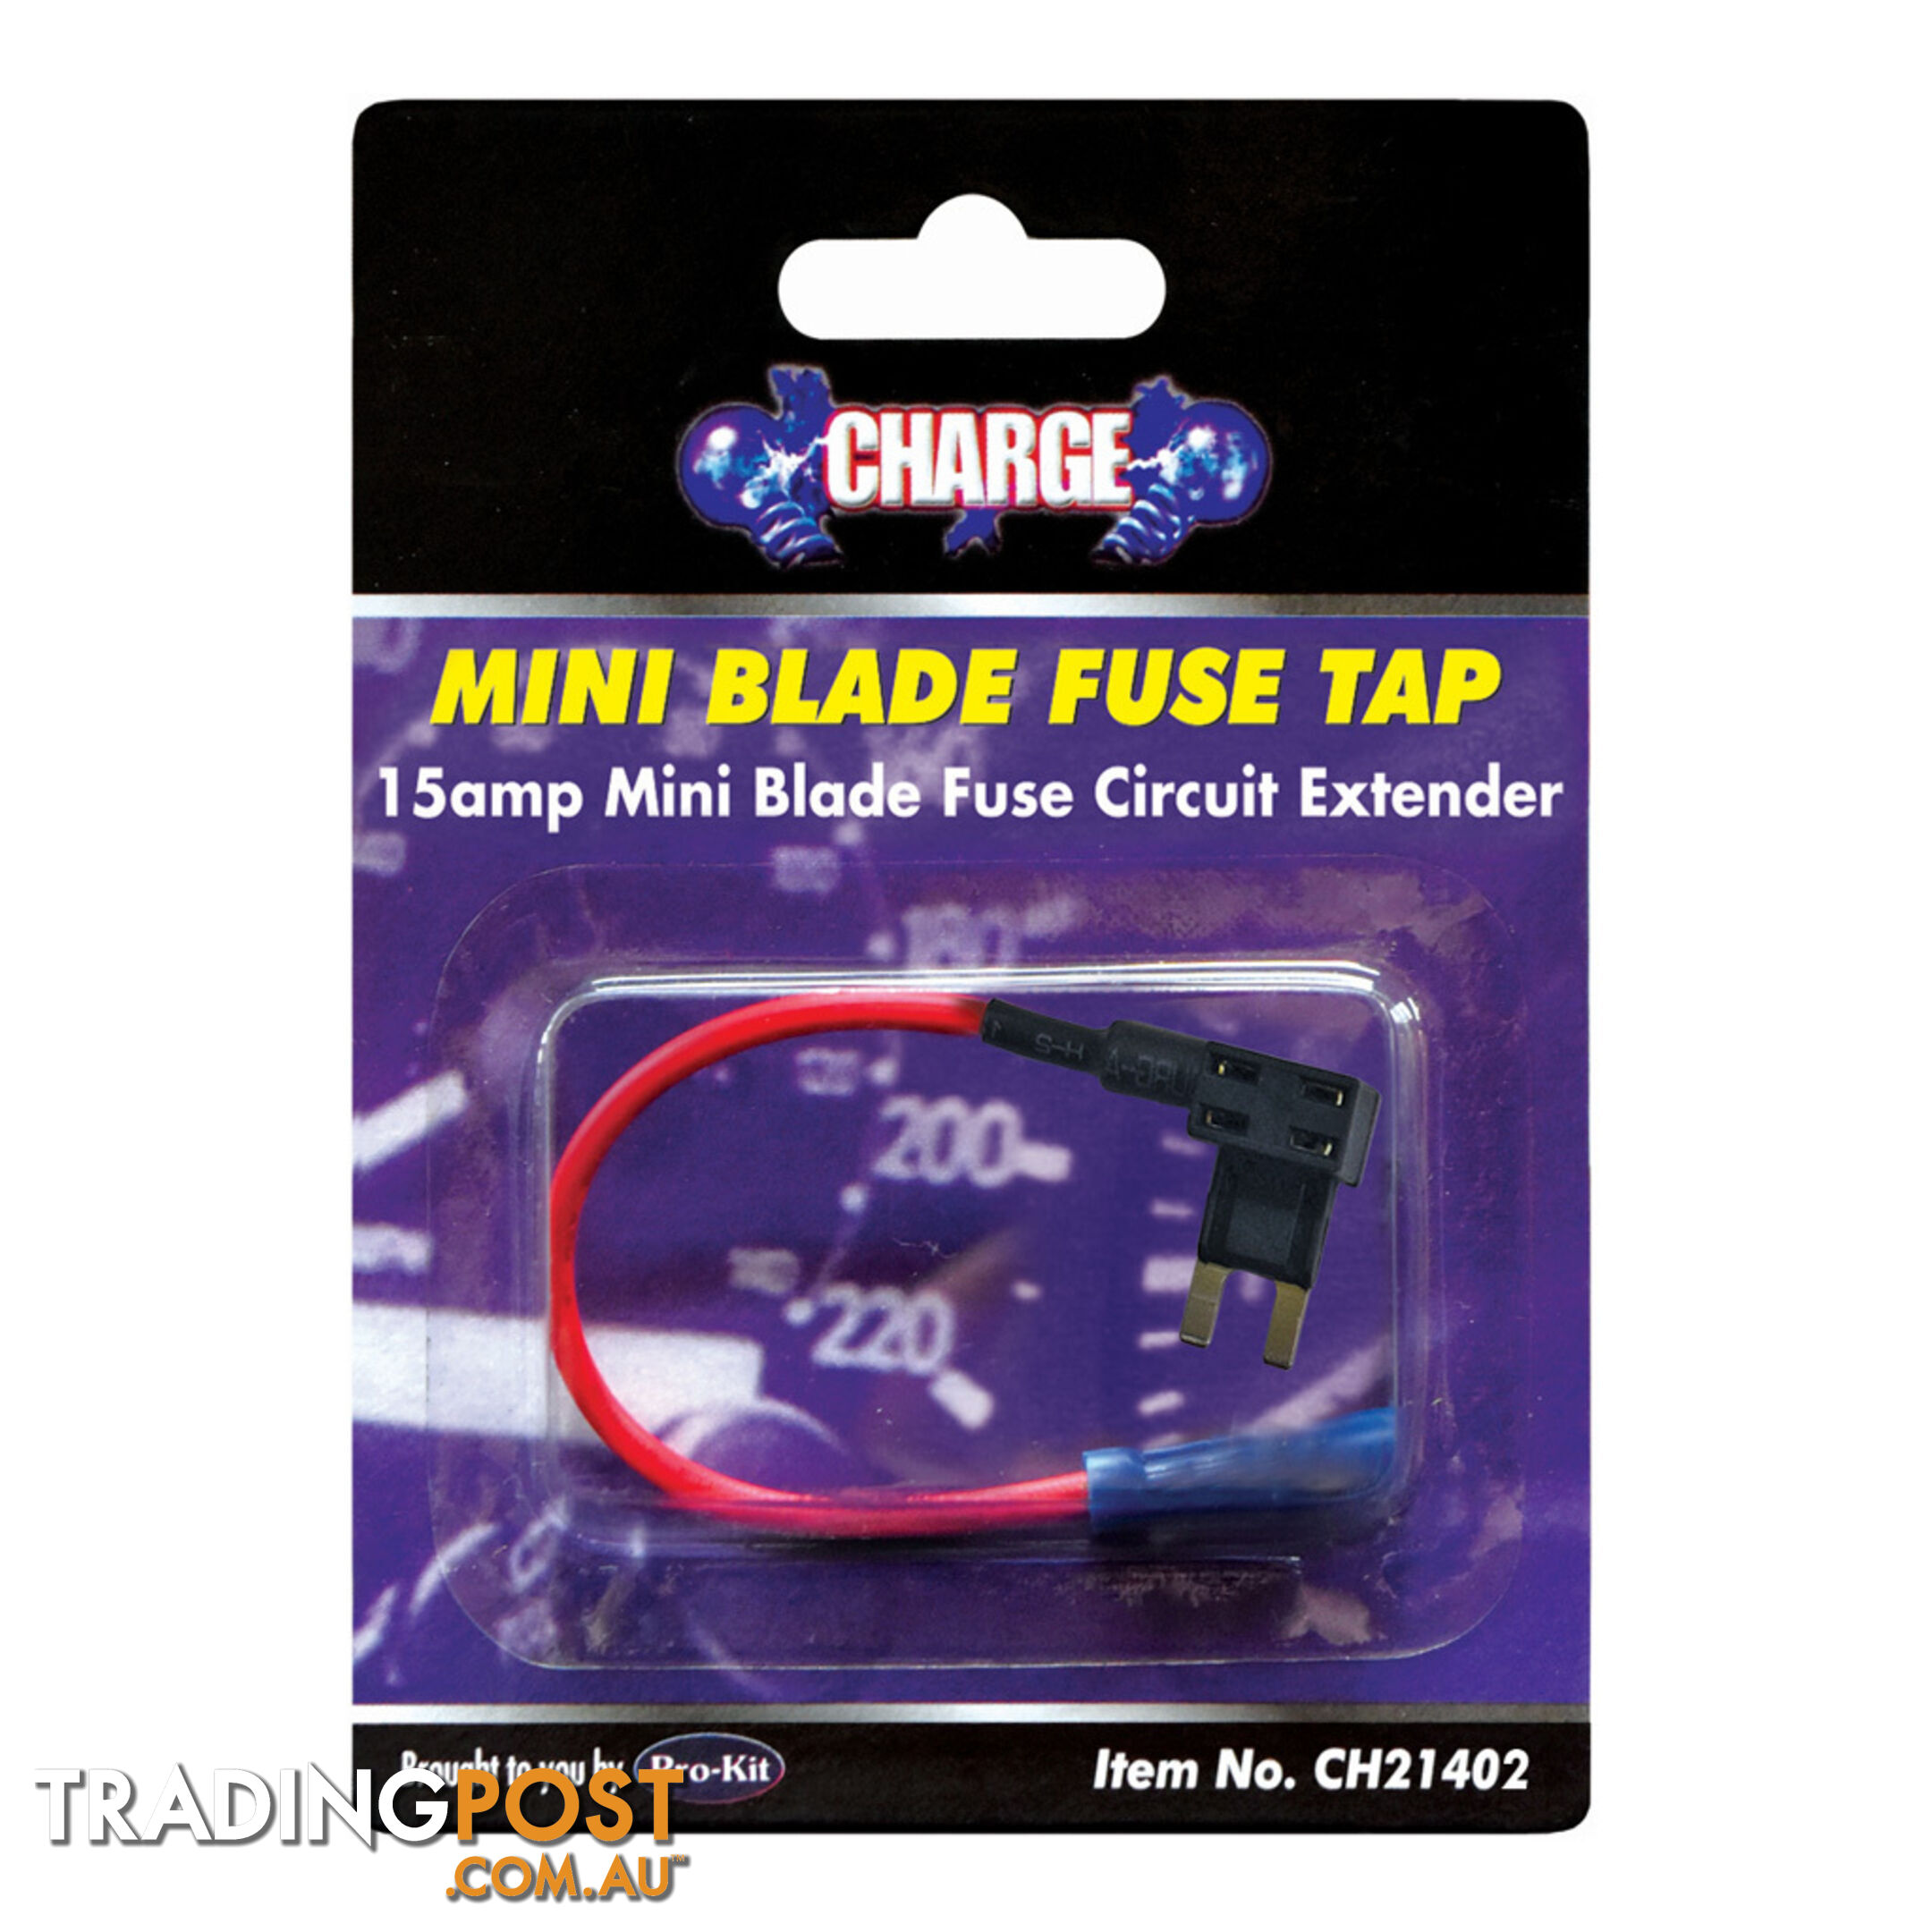 Charge Mini Blade Fuse Tap 15 amp Circuit Extender SKU - CH21402